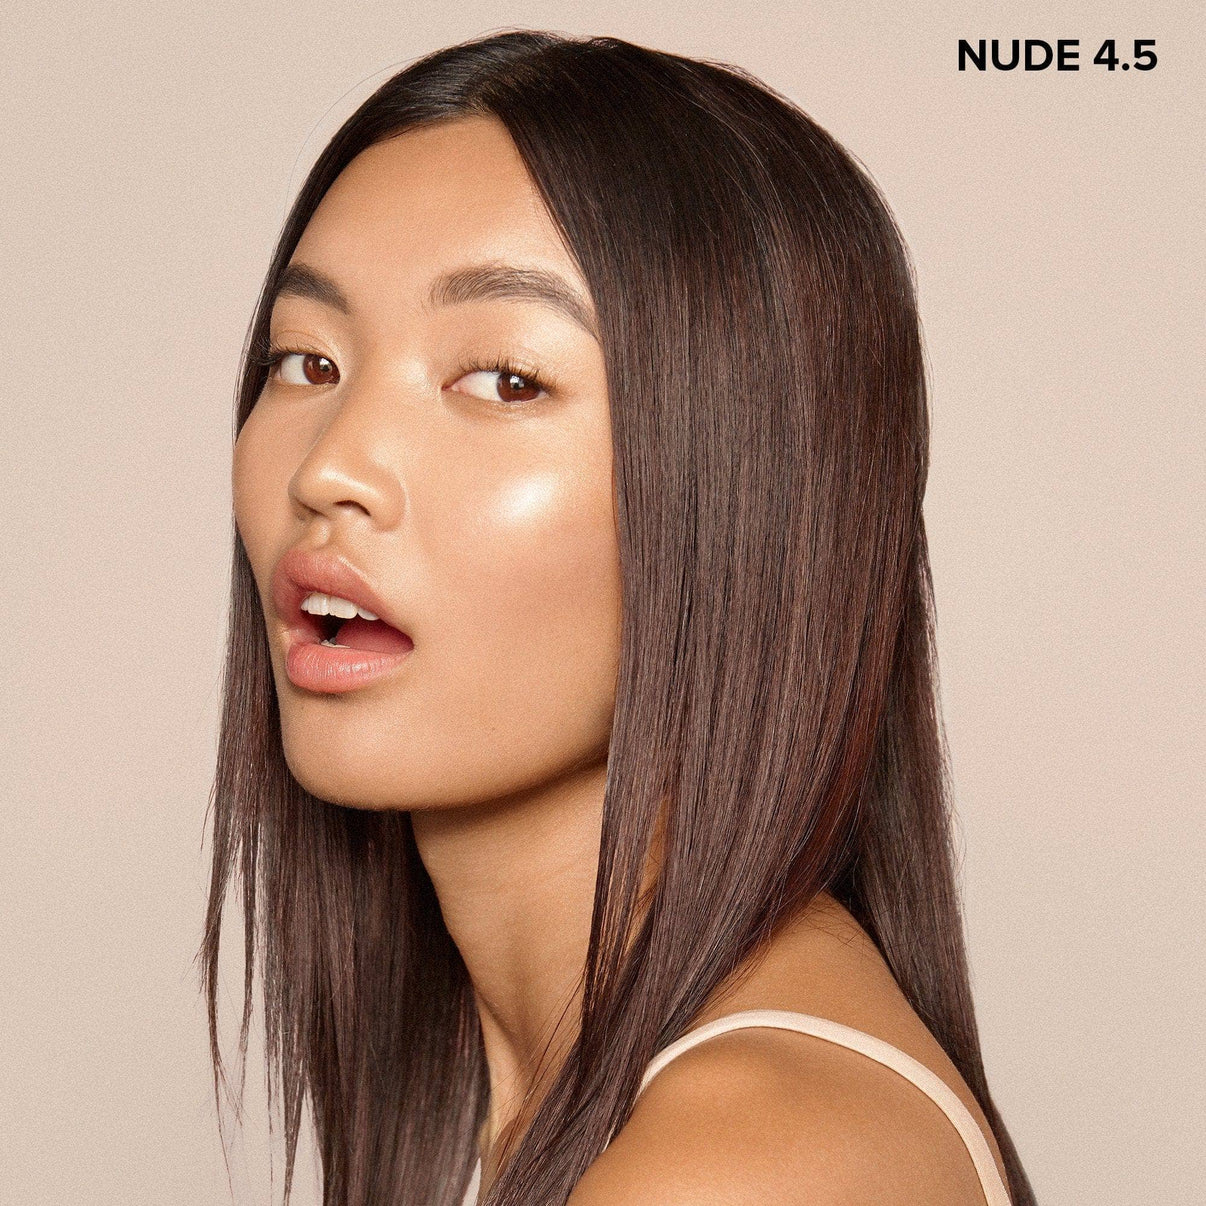 Young woman wearing Nudefix cream concealer in shade nude 4.5